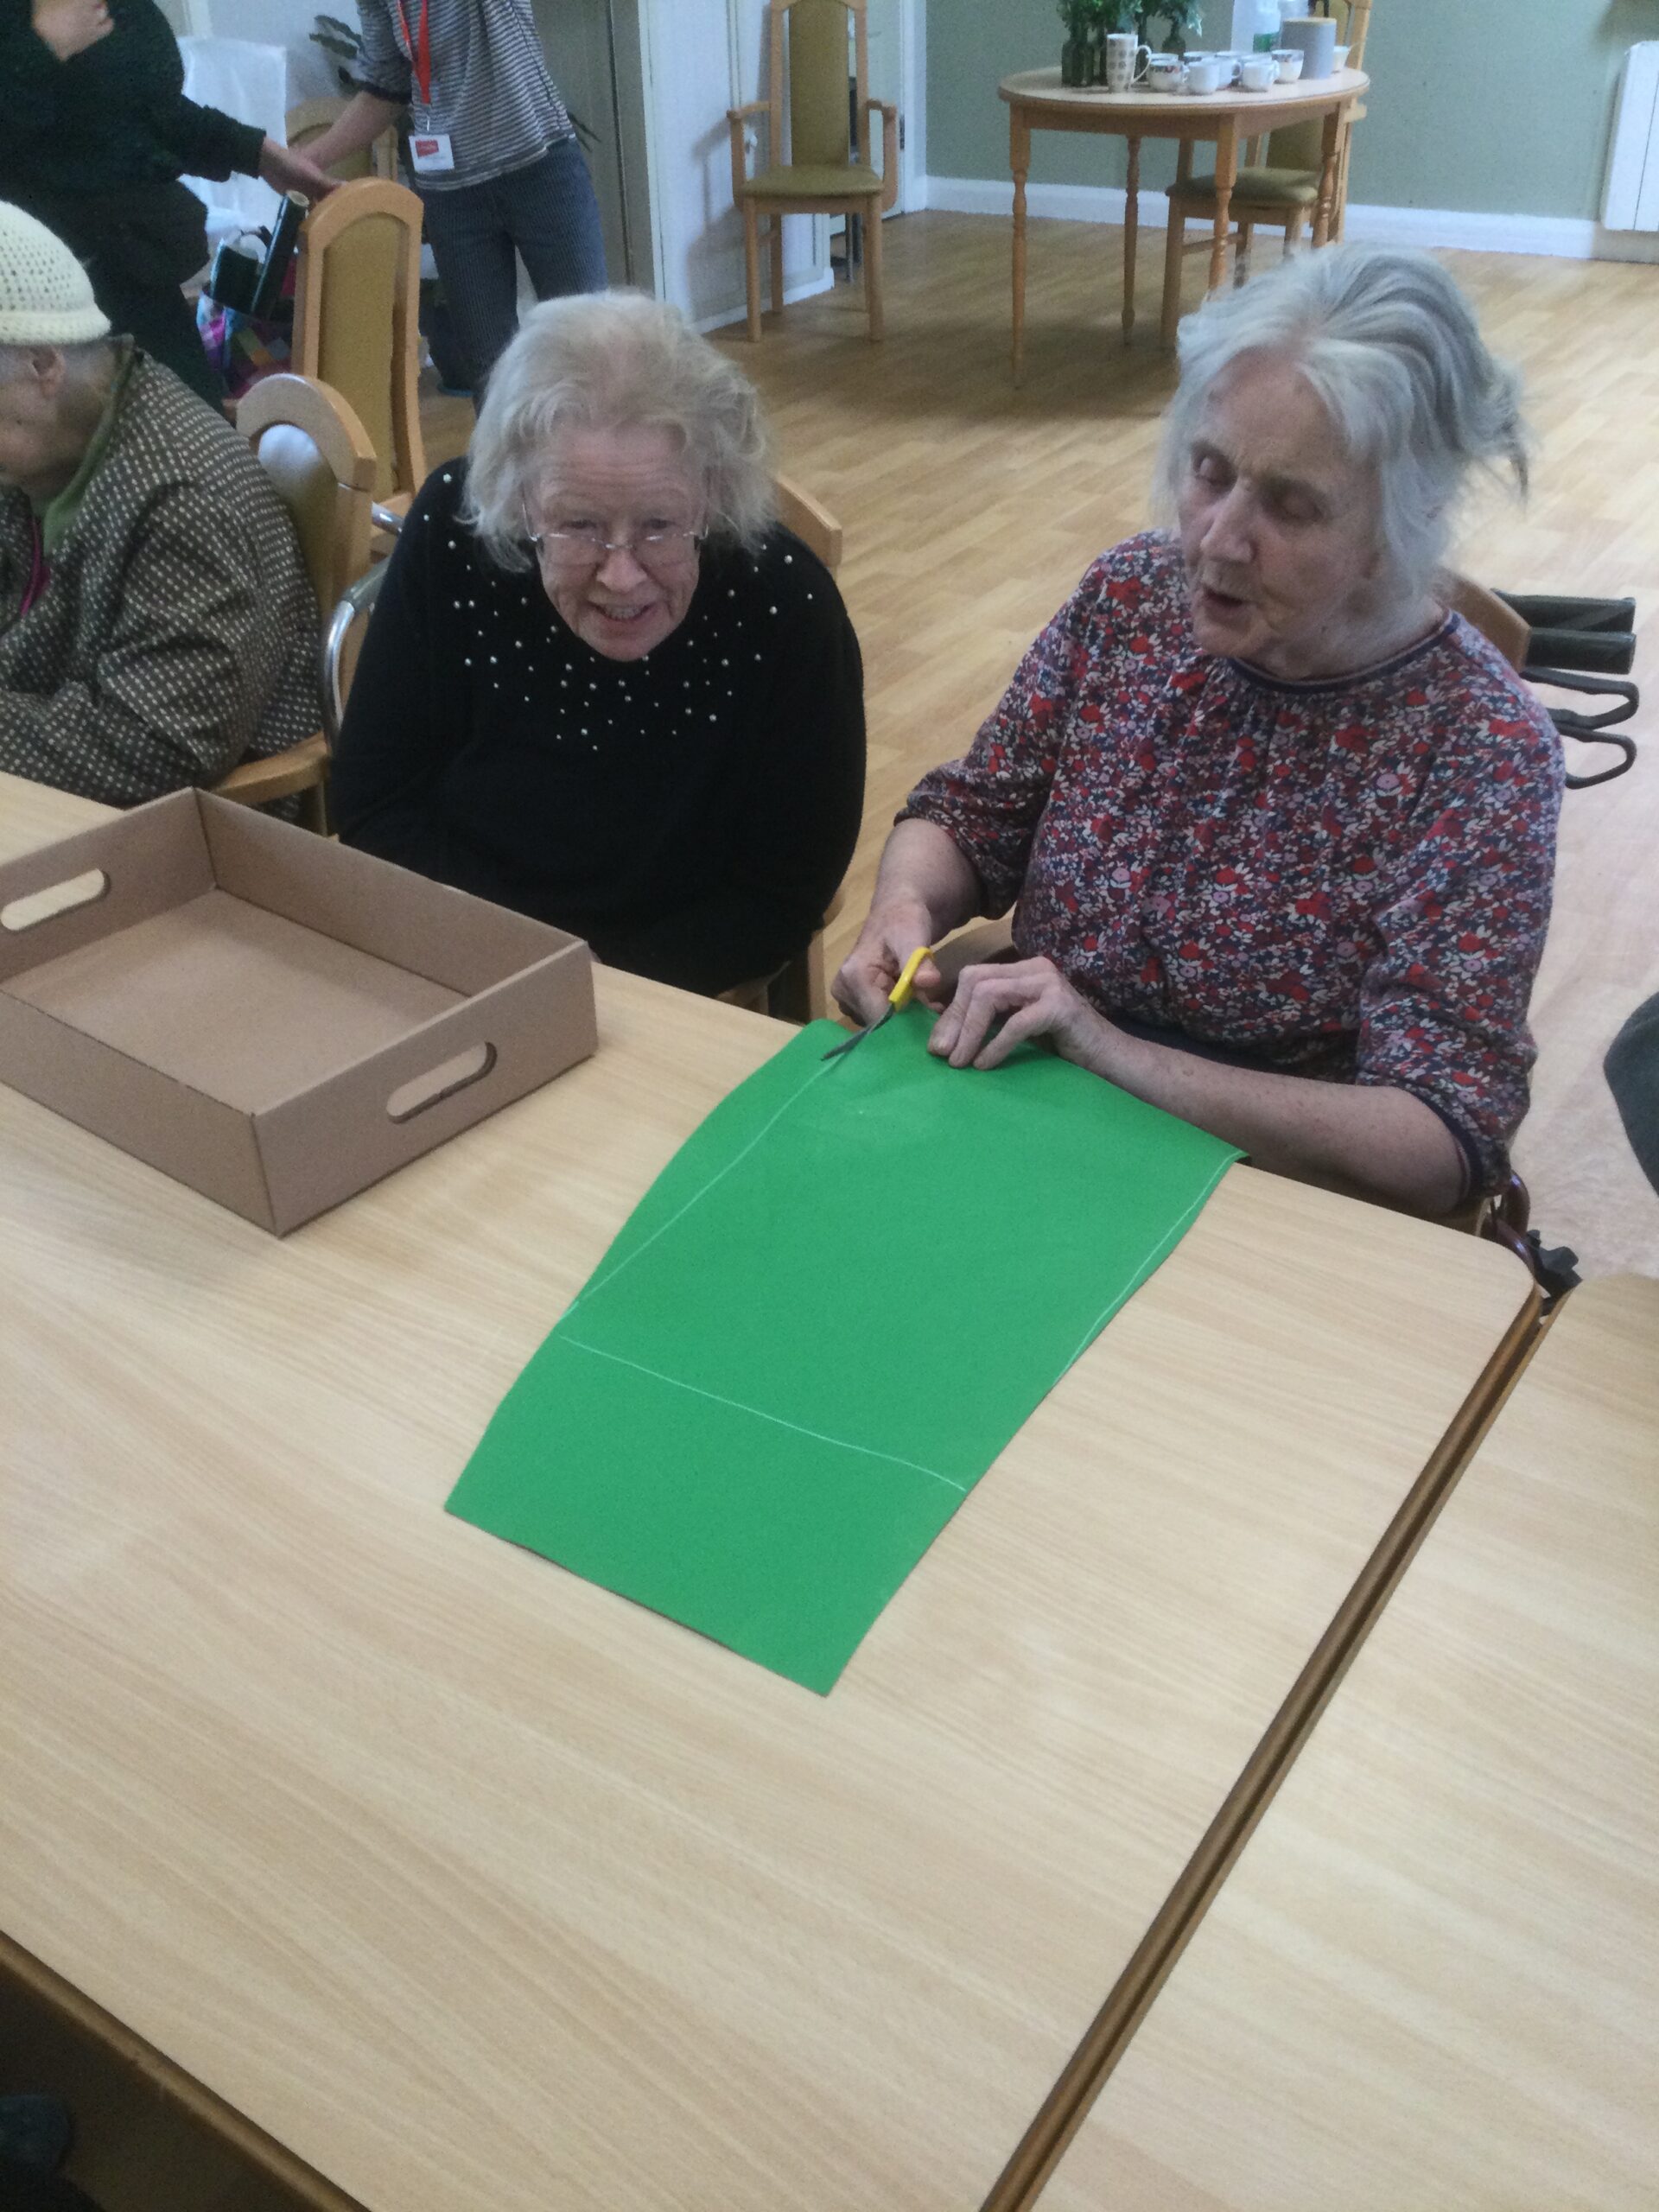 Two women seated, one with a cardboard box in front of her and the other cutting a piece of green material